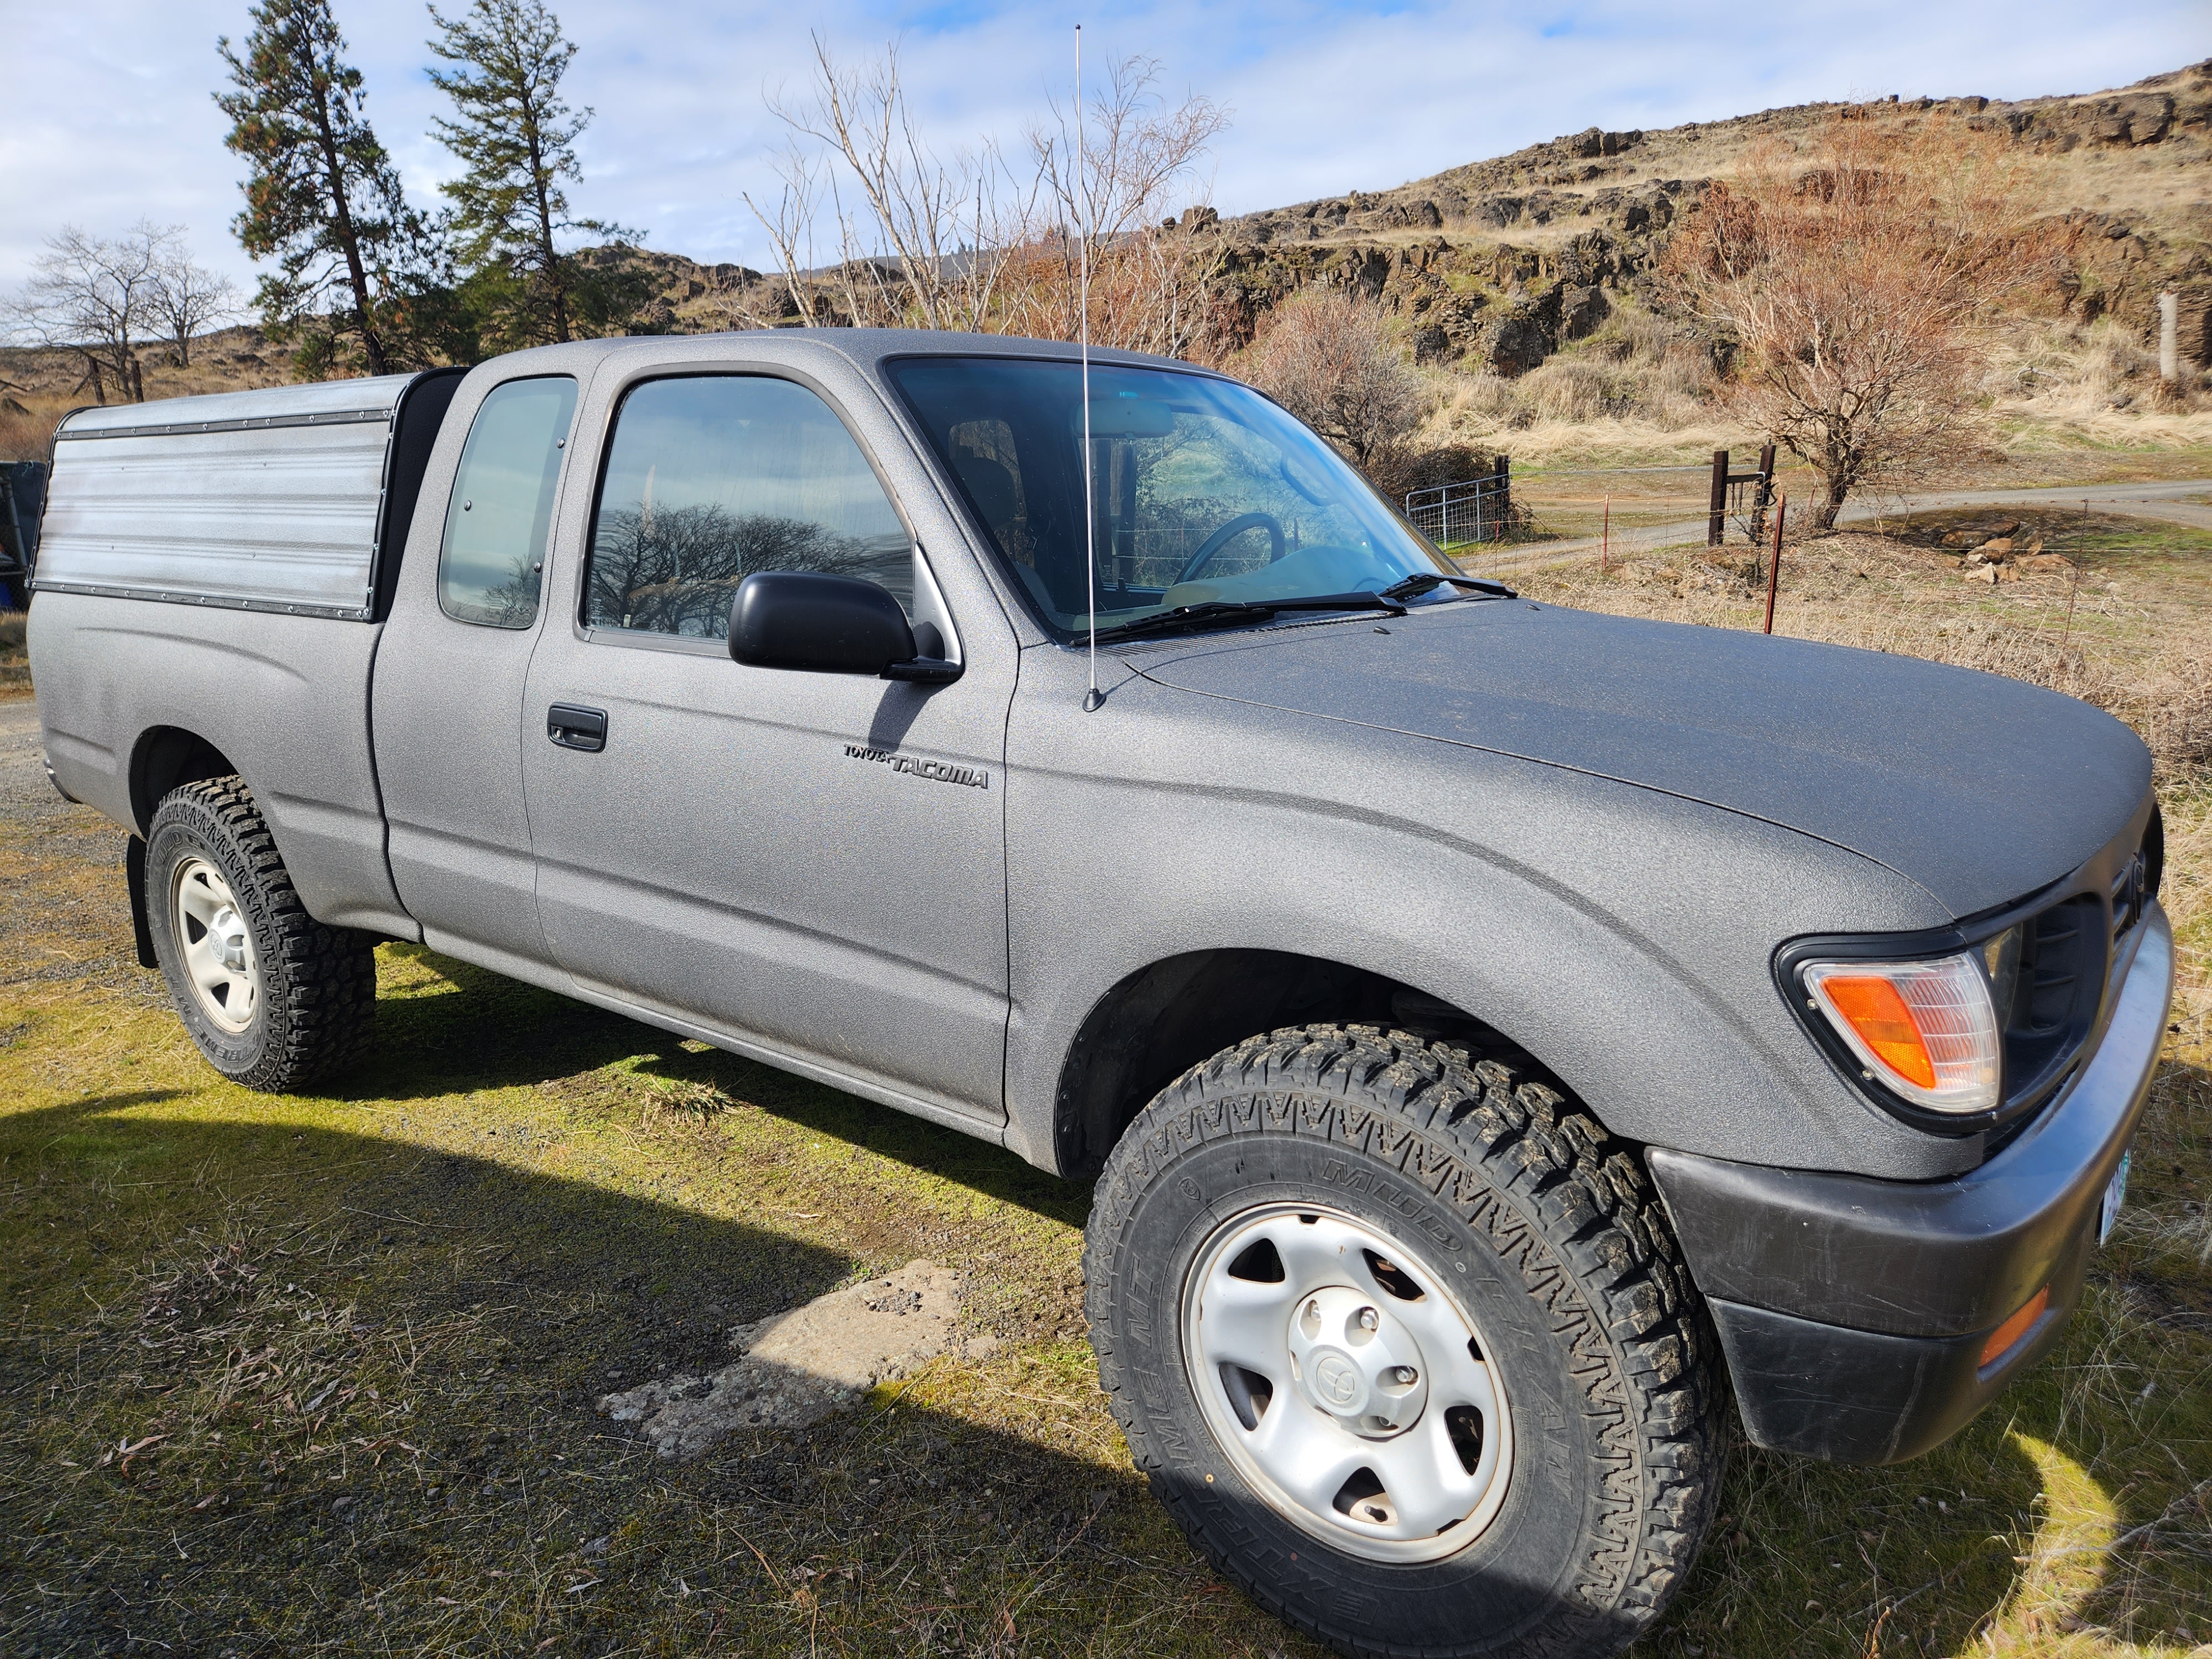 Used Toyota Tacoma Trucks for Sale Near Me in The Dalles, OR - Autotrader